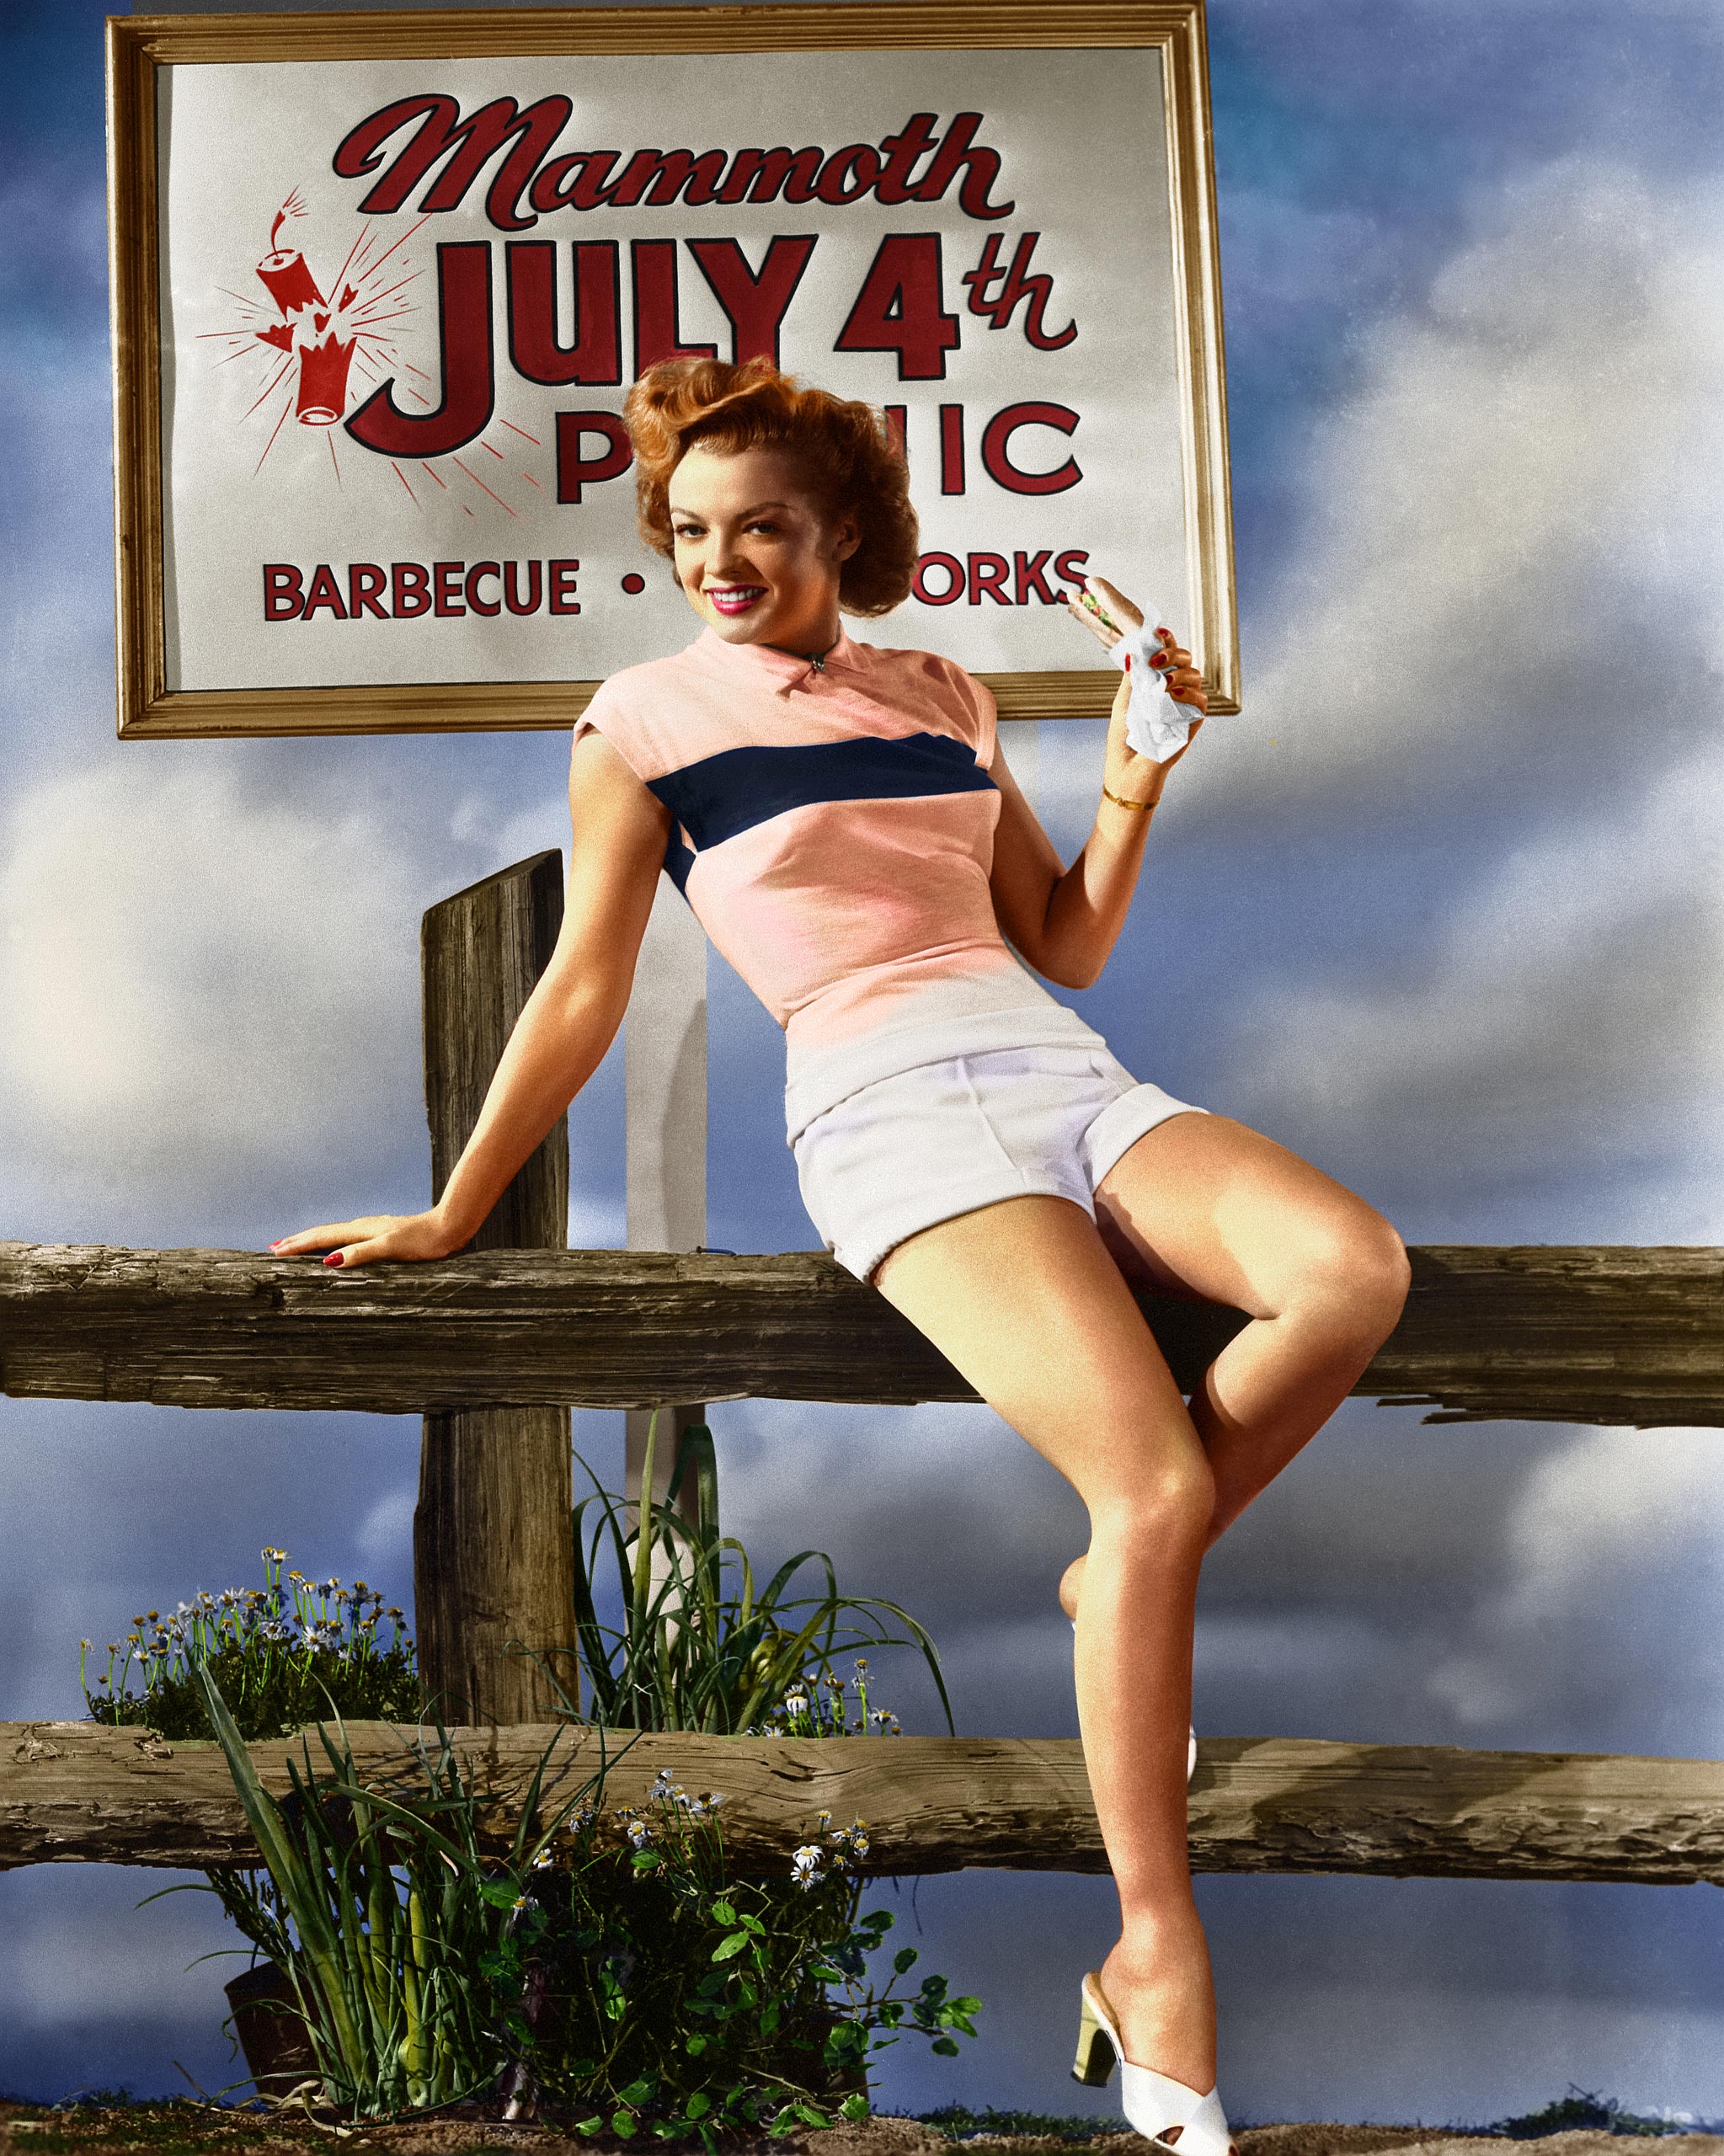 No Fourth of July is complete without a picnic, and no picnic is complete without pretty girls. RKO Radio starlet Myrna Dell typifies the American girl at a traditional independence celebration. Hollywood, California, 1948.